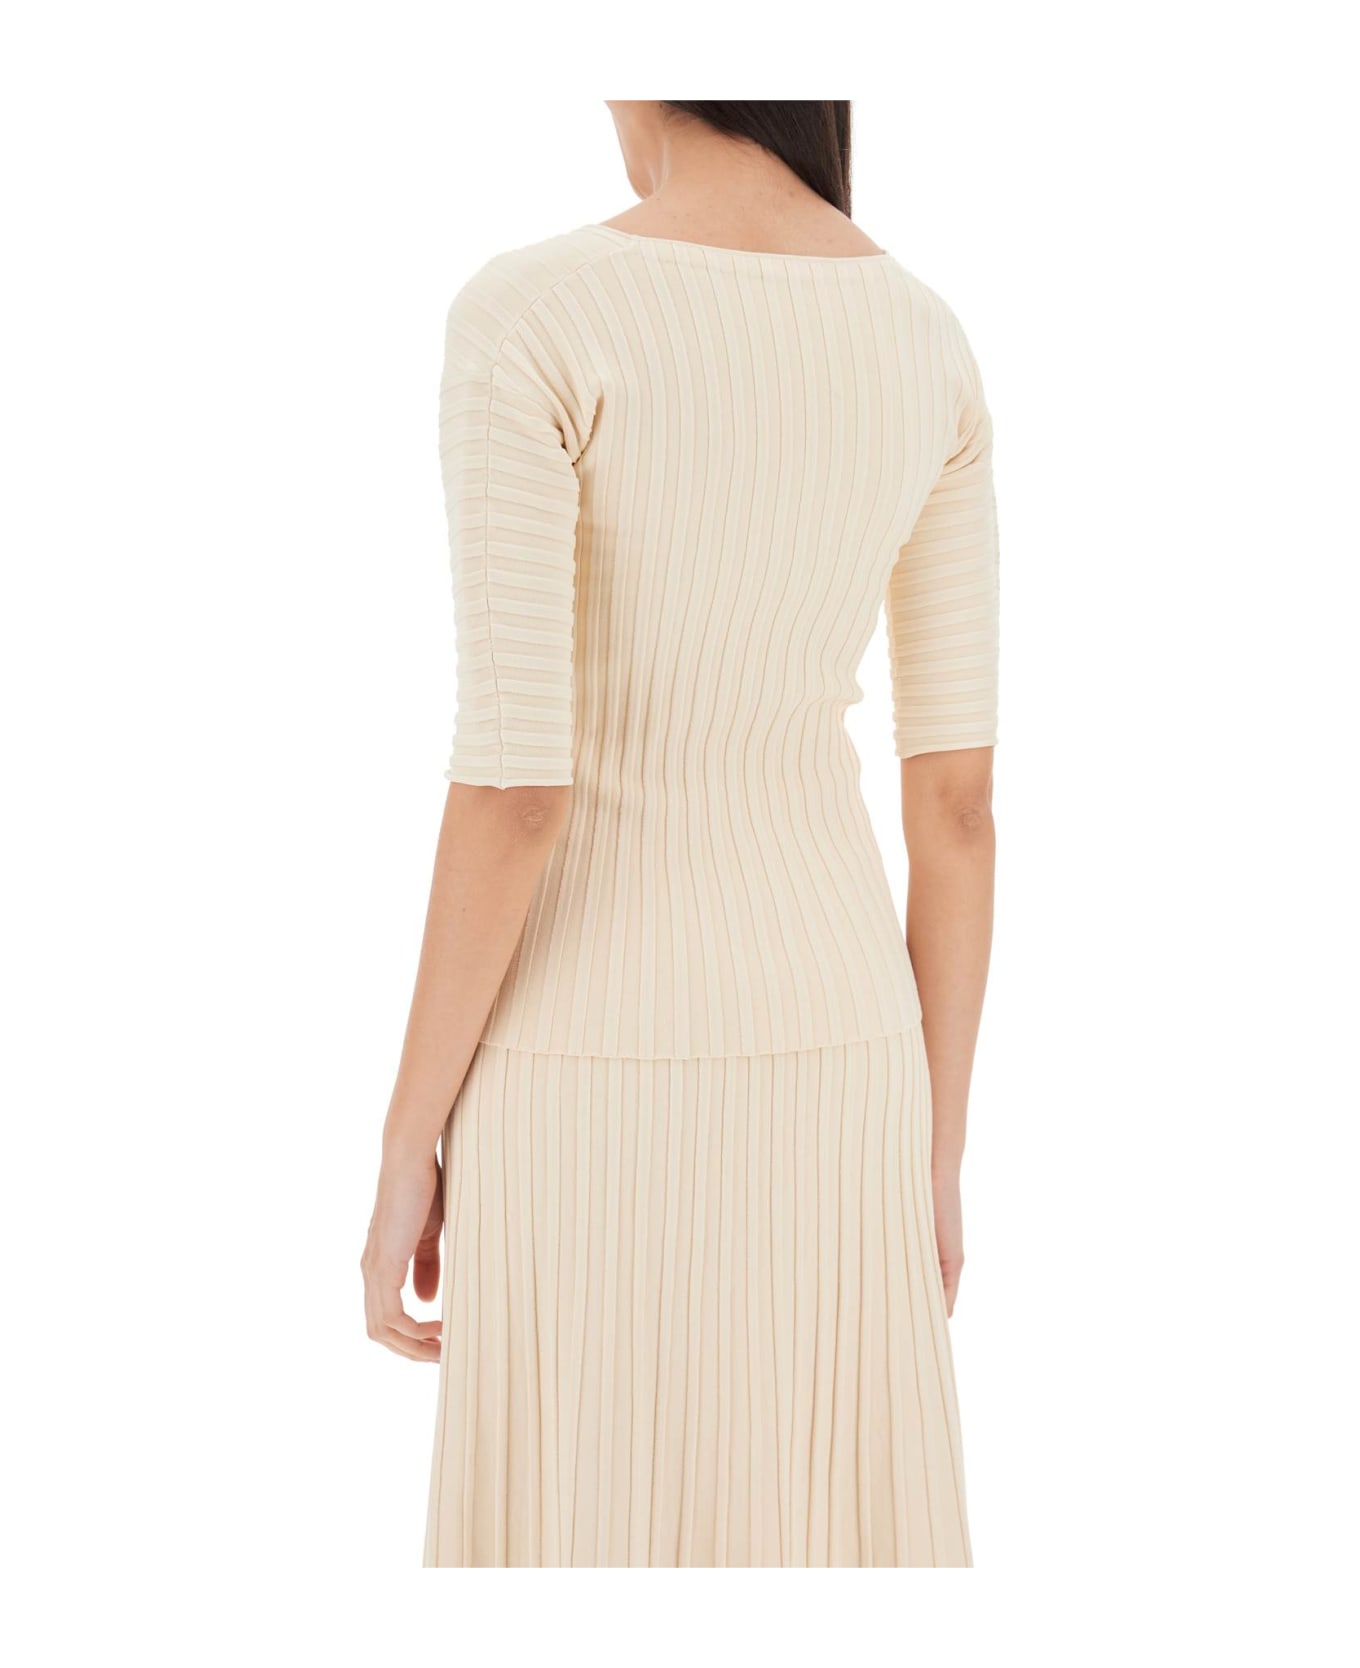 By Malene Birger 'ivena' Ribbed Top With Asymmetrical Neckline - SOFT WHITE (Beige)